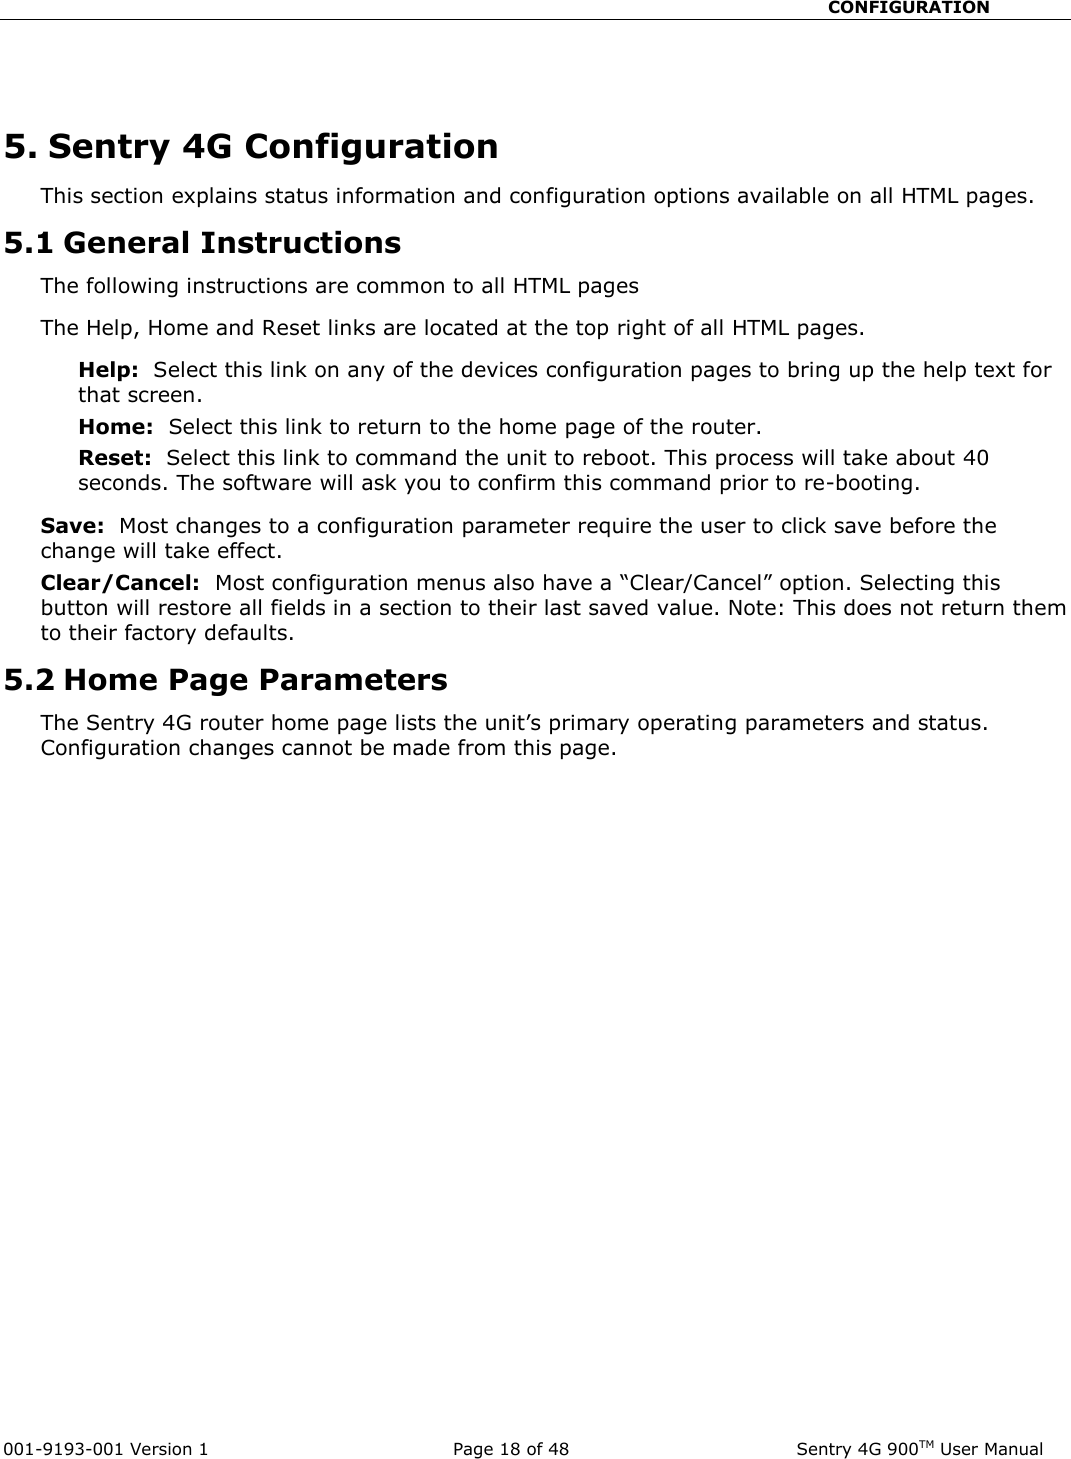                                                       CONFIGURATION  001-9193-001 Version 1              Page 18 of 48               Sentry 4G 900TM User Manual  5. Sentry 4G Configuration This section explains status information and configuration options available on all HTML pages.   5.1 General Instructions The following instructions are common to all HTML pages The Help, Home and Reset links are located at the top right of all HTML pages.   Help:  Select this link on any of the devices configuration pages to bring up the help text for that screen.   Home:  Select this link to return to the home page of the router.   Reset:  Select this link to command the unit to reboot. This process will take about 40 seconds. The software will ask you to confirm this command prior to re-booting.     Save:  Most changes to a configuration parameter require the user to click save before the change will take effect.   Clear/Cancel:  Most configuration menus also have a “Clear/Cancel” option. Selecting this button will restore all fields in a section to their last saved value. Note: This does not return them to their factory defaults.   5.2 Home Page Parameters The Sentry 4G router home page lists the unit’s primary operating parameters and status. Configuration changes cannot be made from this page.     